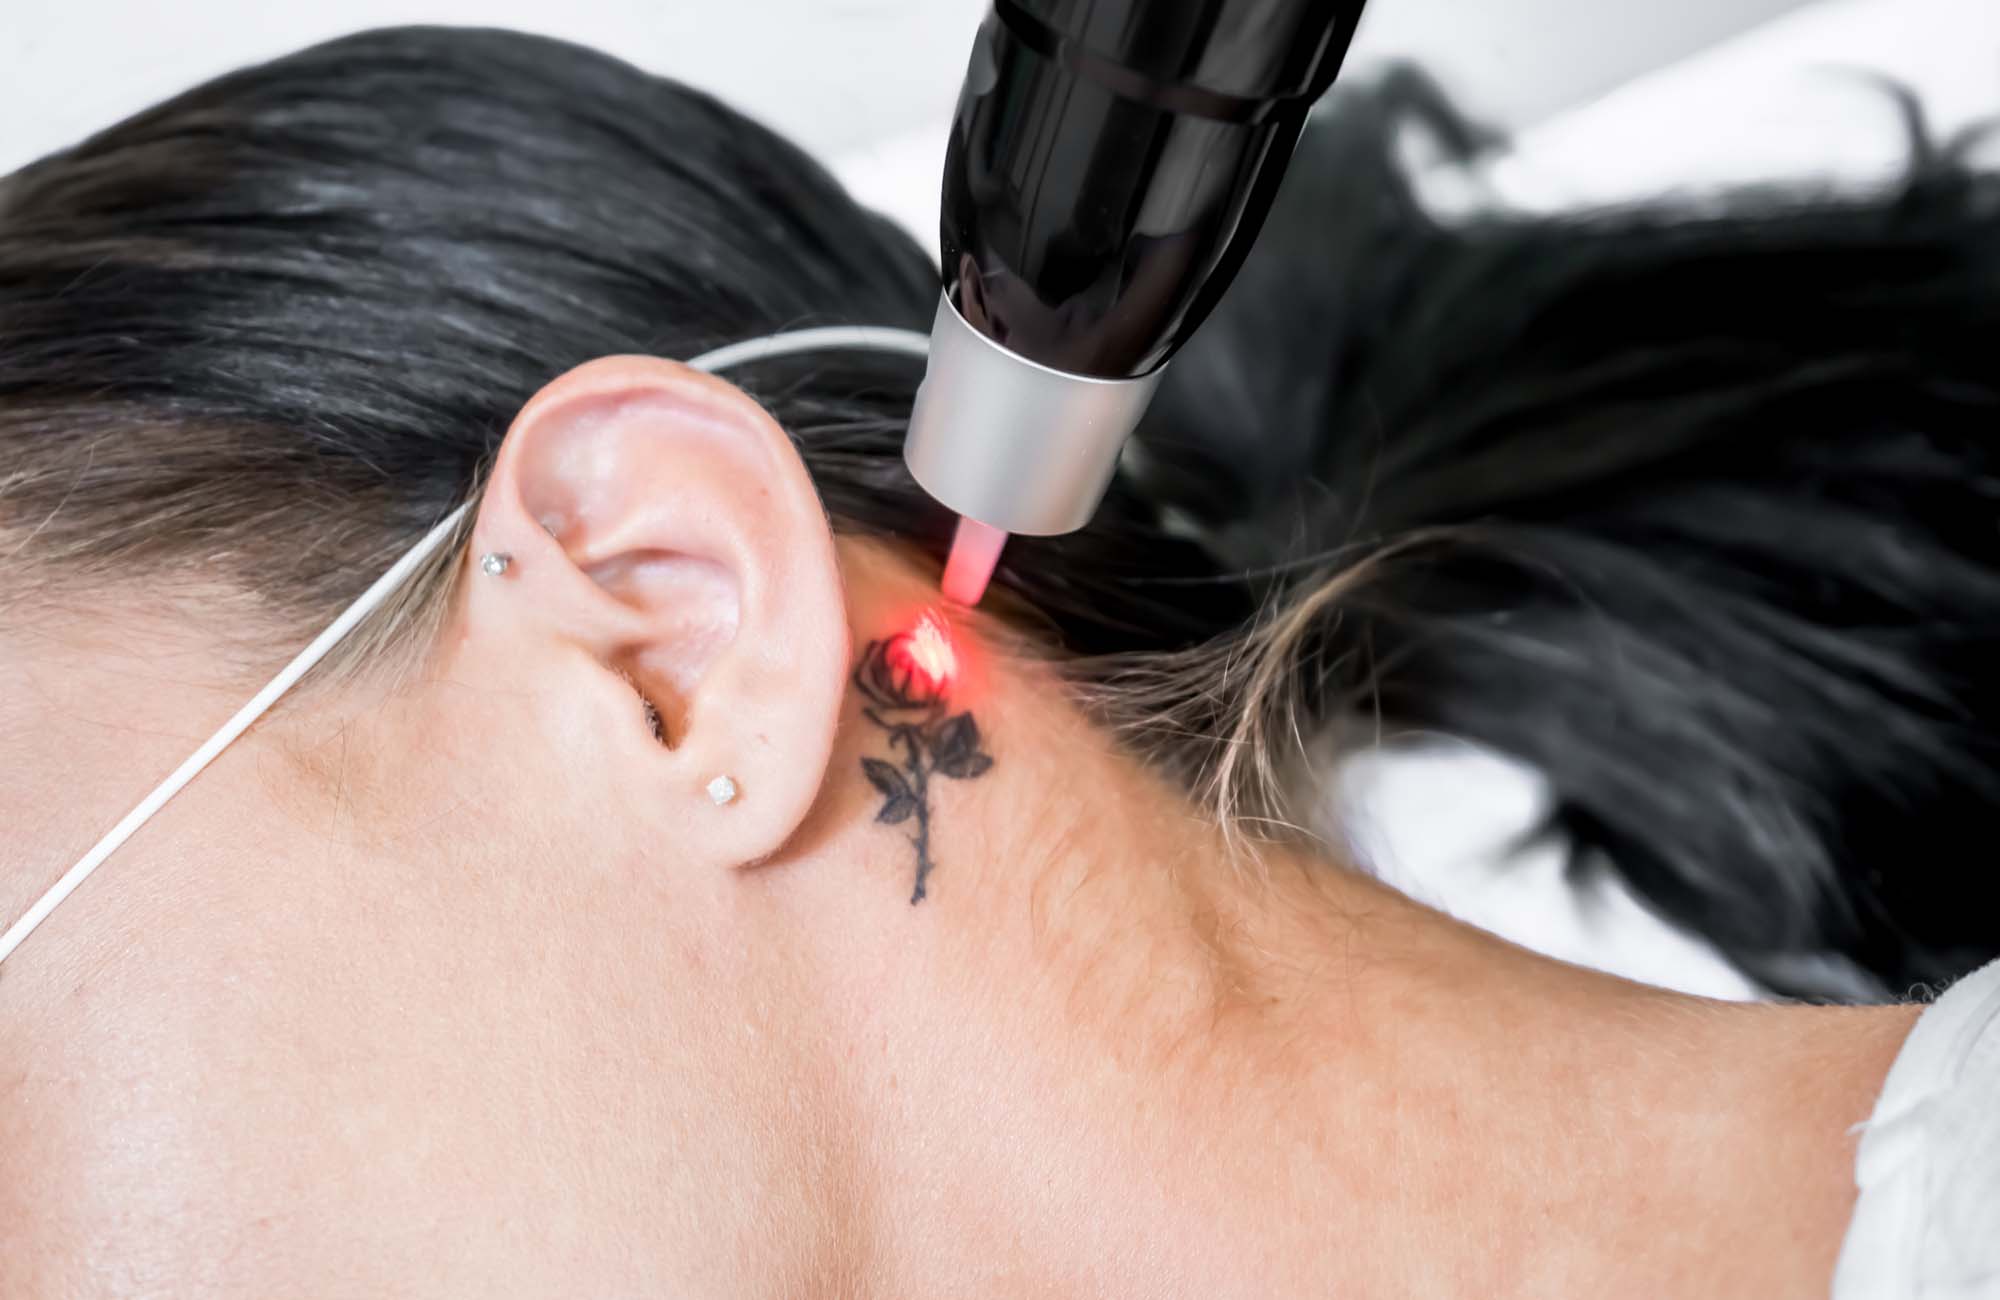 Laser tattoo removal treatment session on patient, using picosecond technology, to break down tattoo ink into smaller particles. At a beauty and skincare clinic for aesthetic lasers.